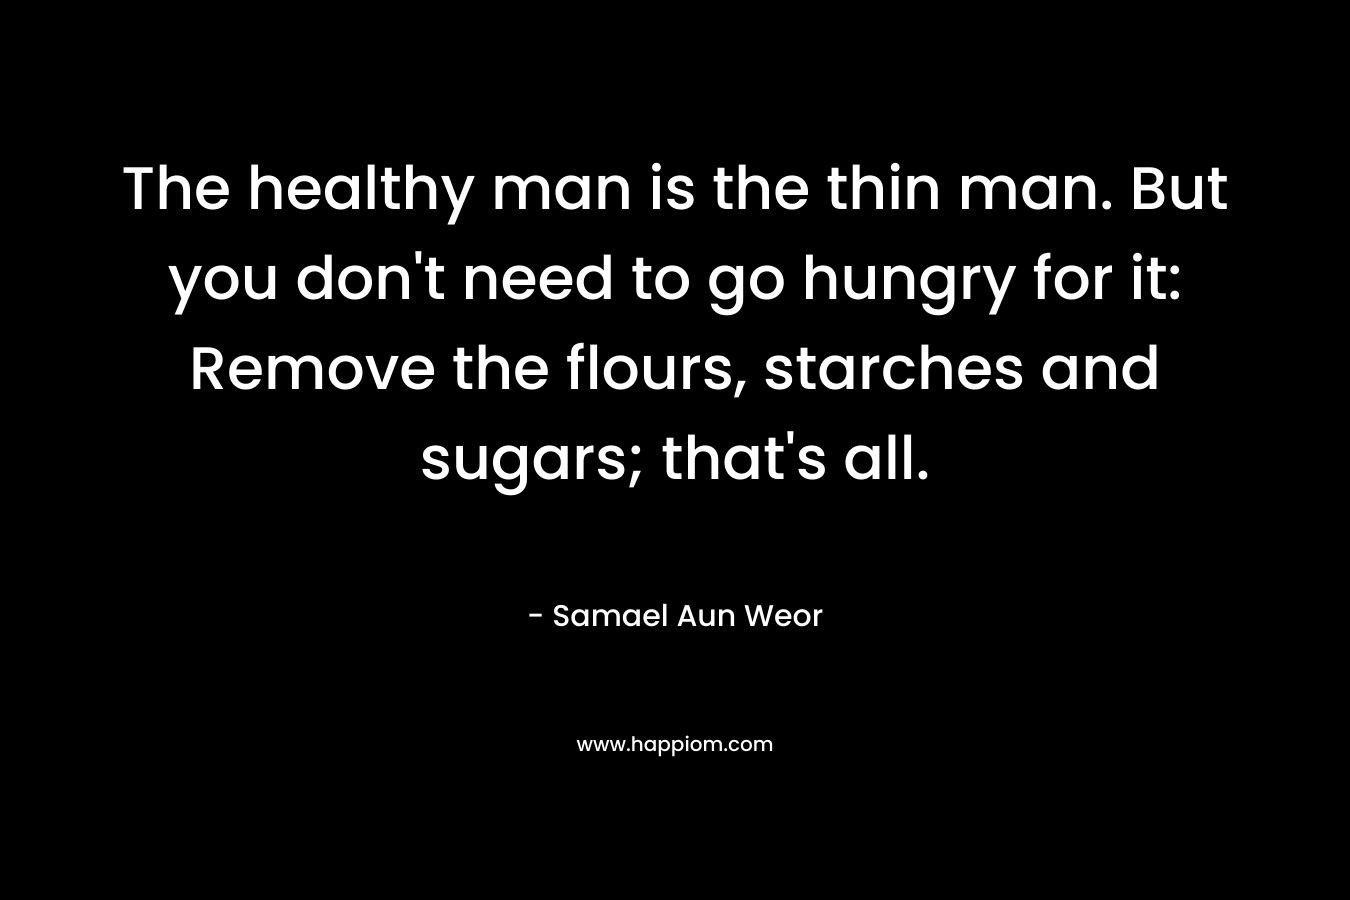 The healthy man is the thin man. But you don’t need to go hungry for it: Remove the flours, starches and sugars; that’s all. – Samael Aun Weor